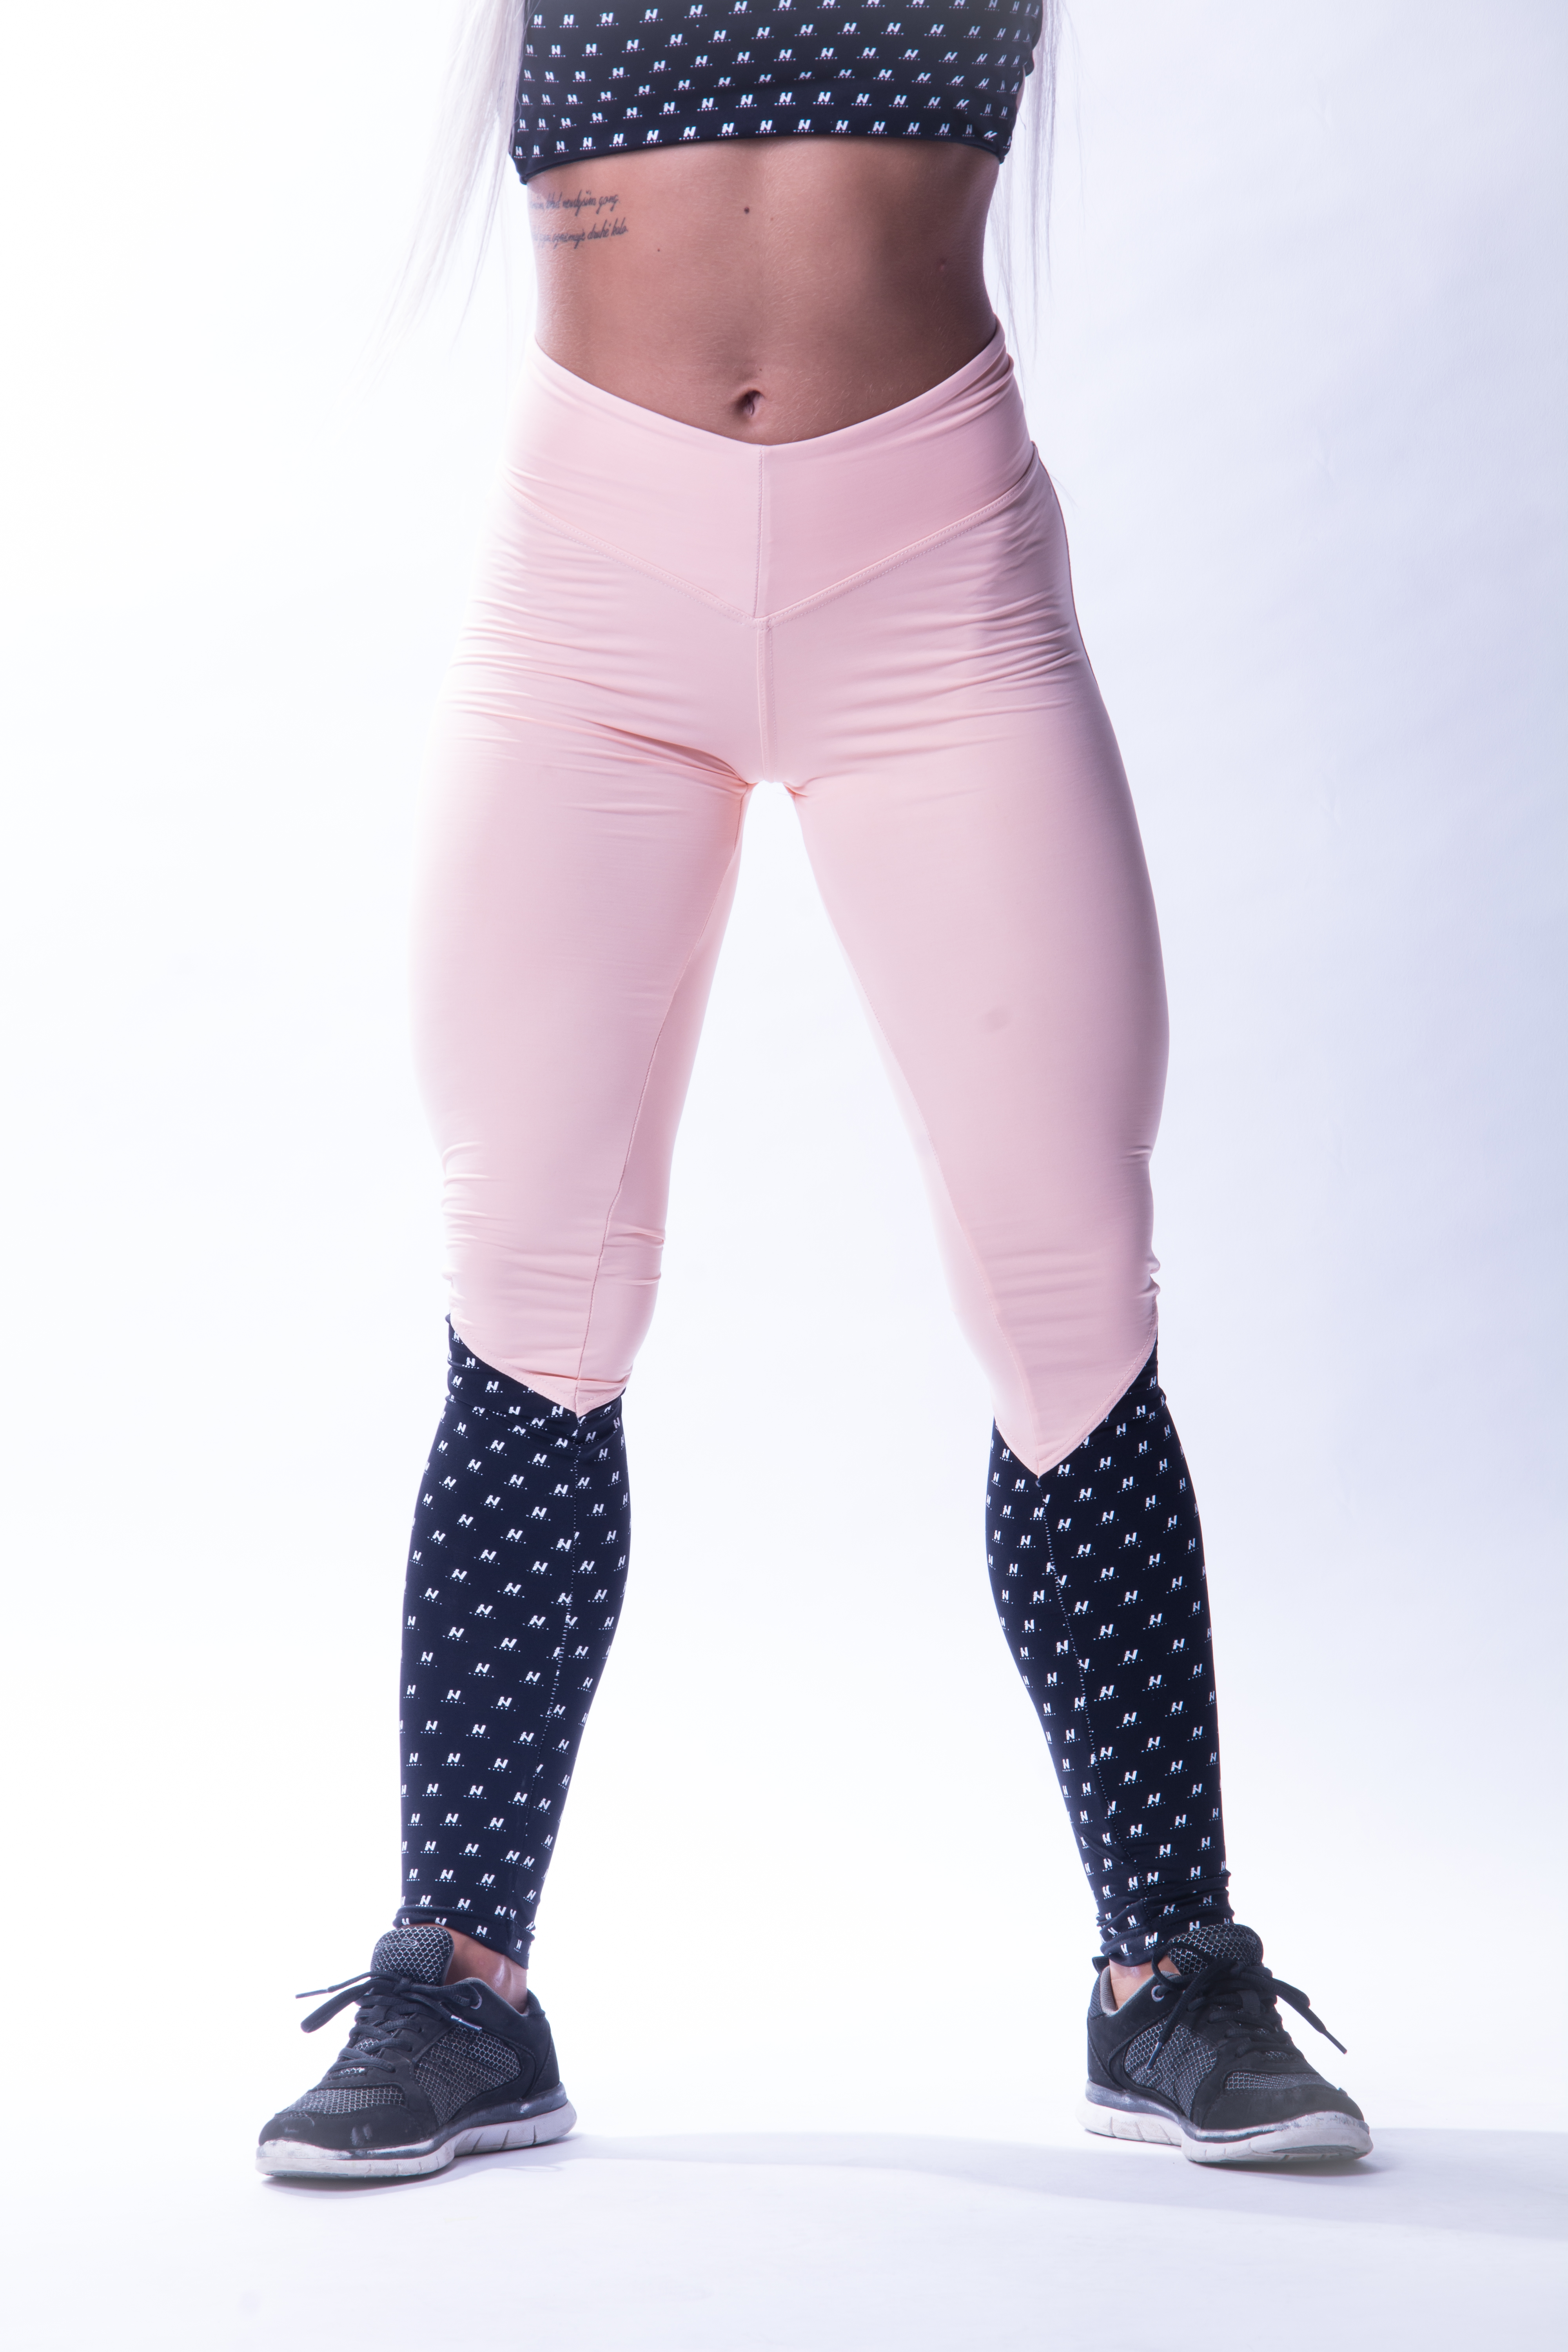 Nebbia Black And White Leggings  International Society of Precision  Agriculture